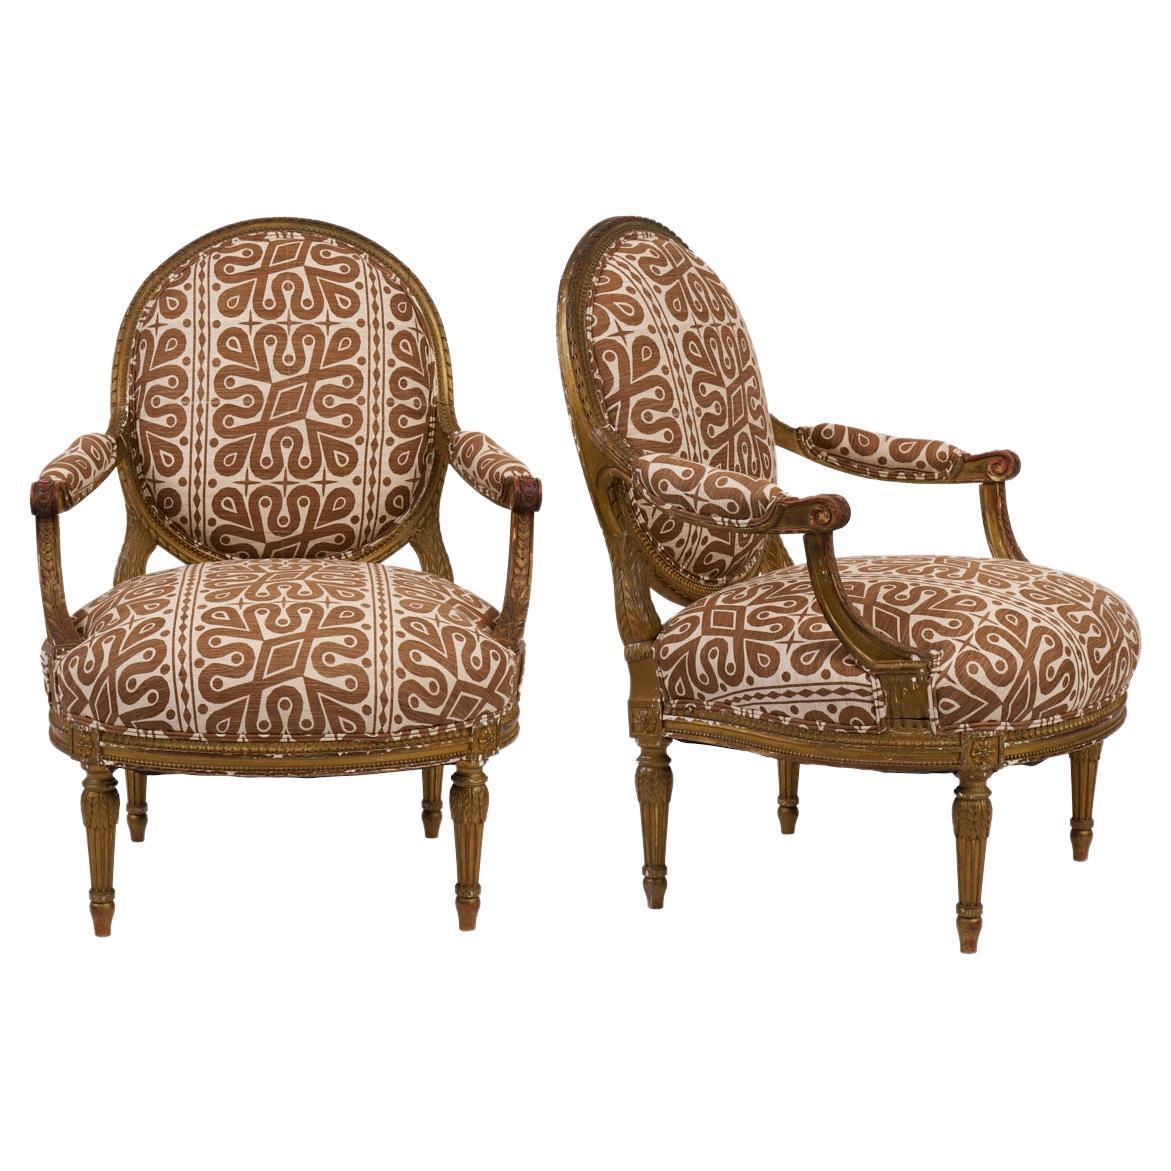 Pair of 19th Century Fauteuils Chairs, Newly Upholstered in Schumacher Fabric